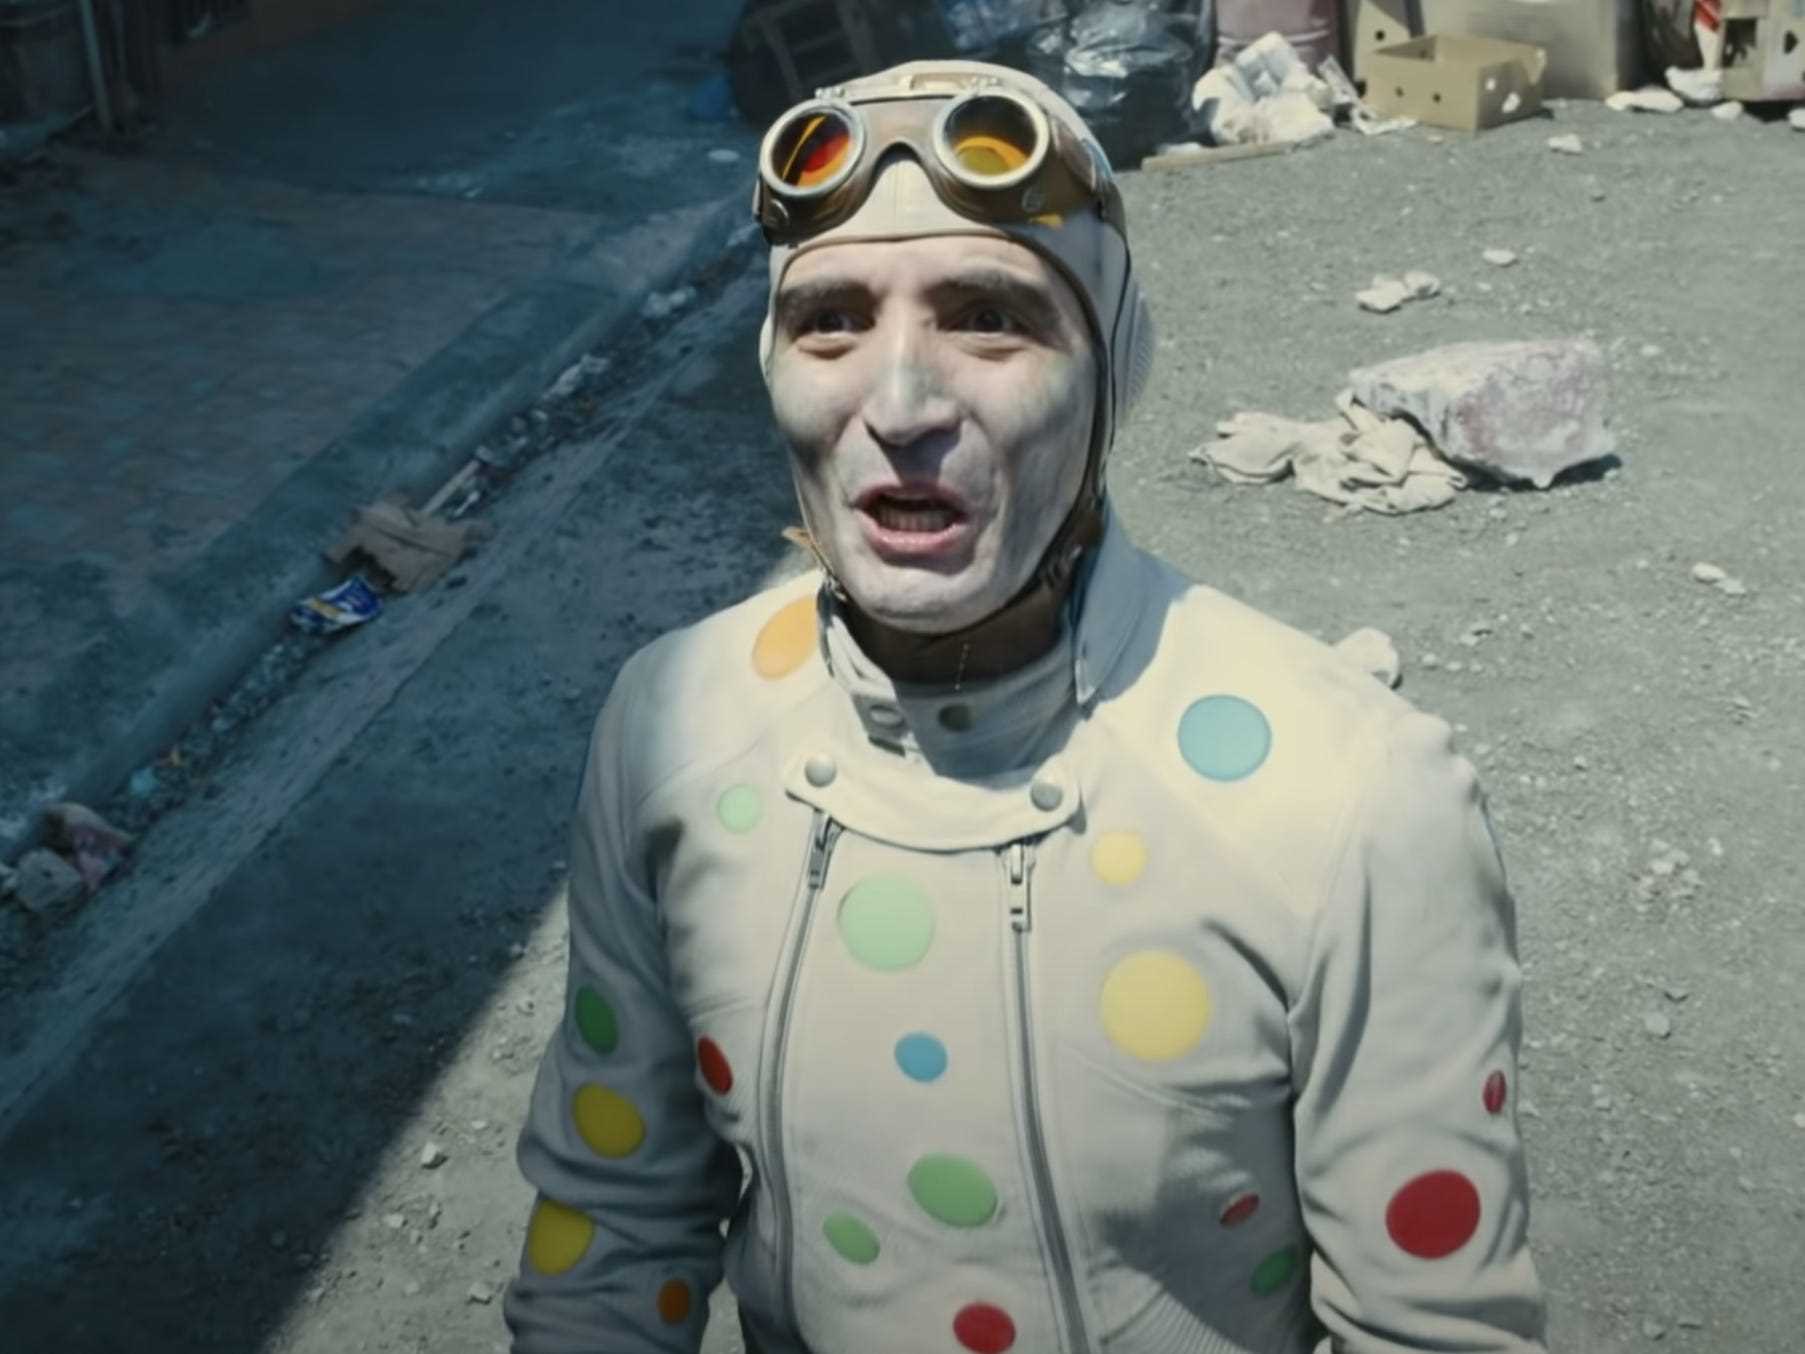 Abner Krill Polka-Dot Man in „The Suicide Squad“